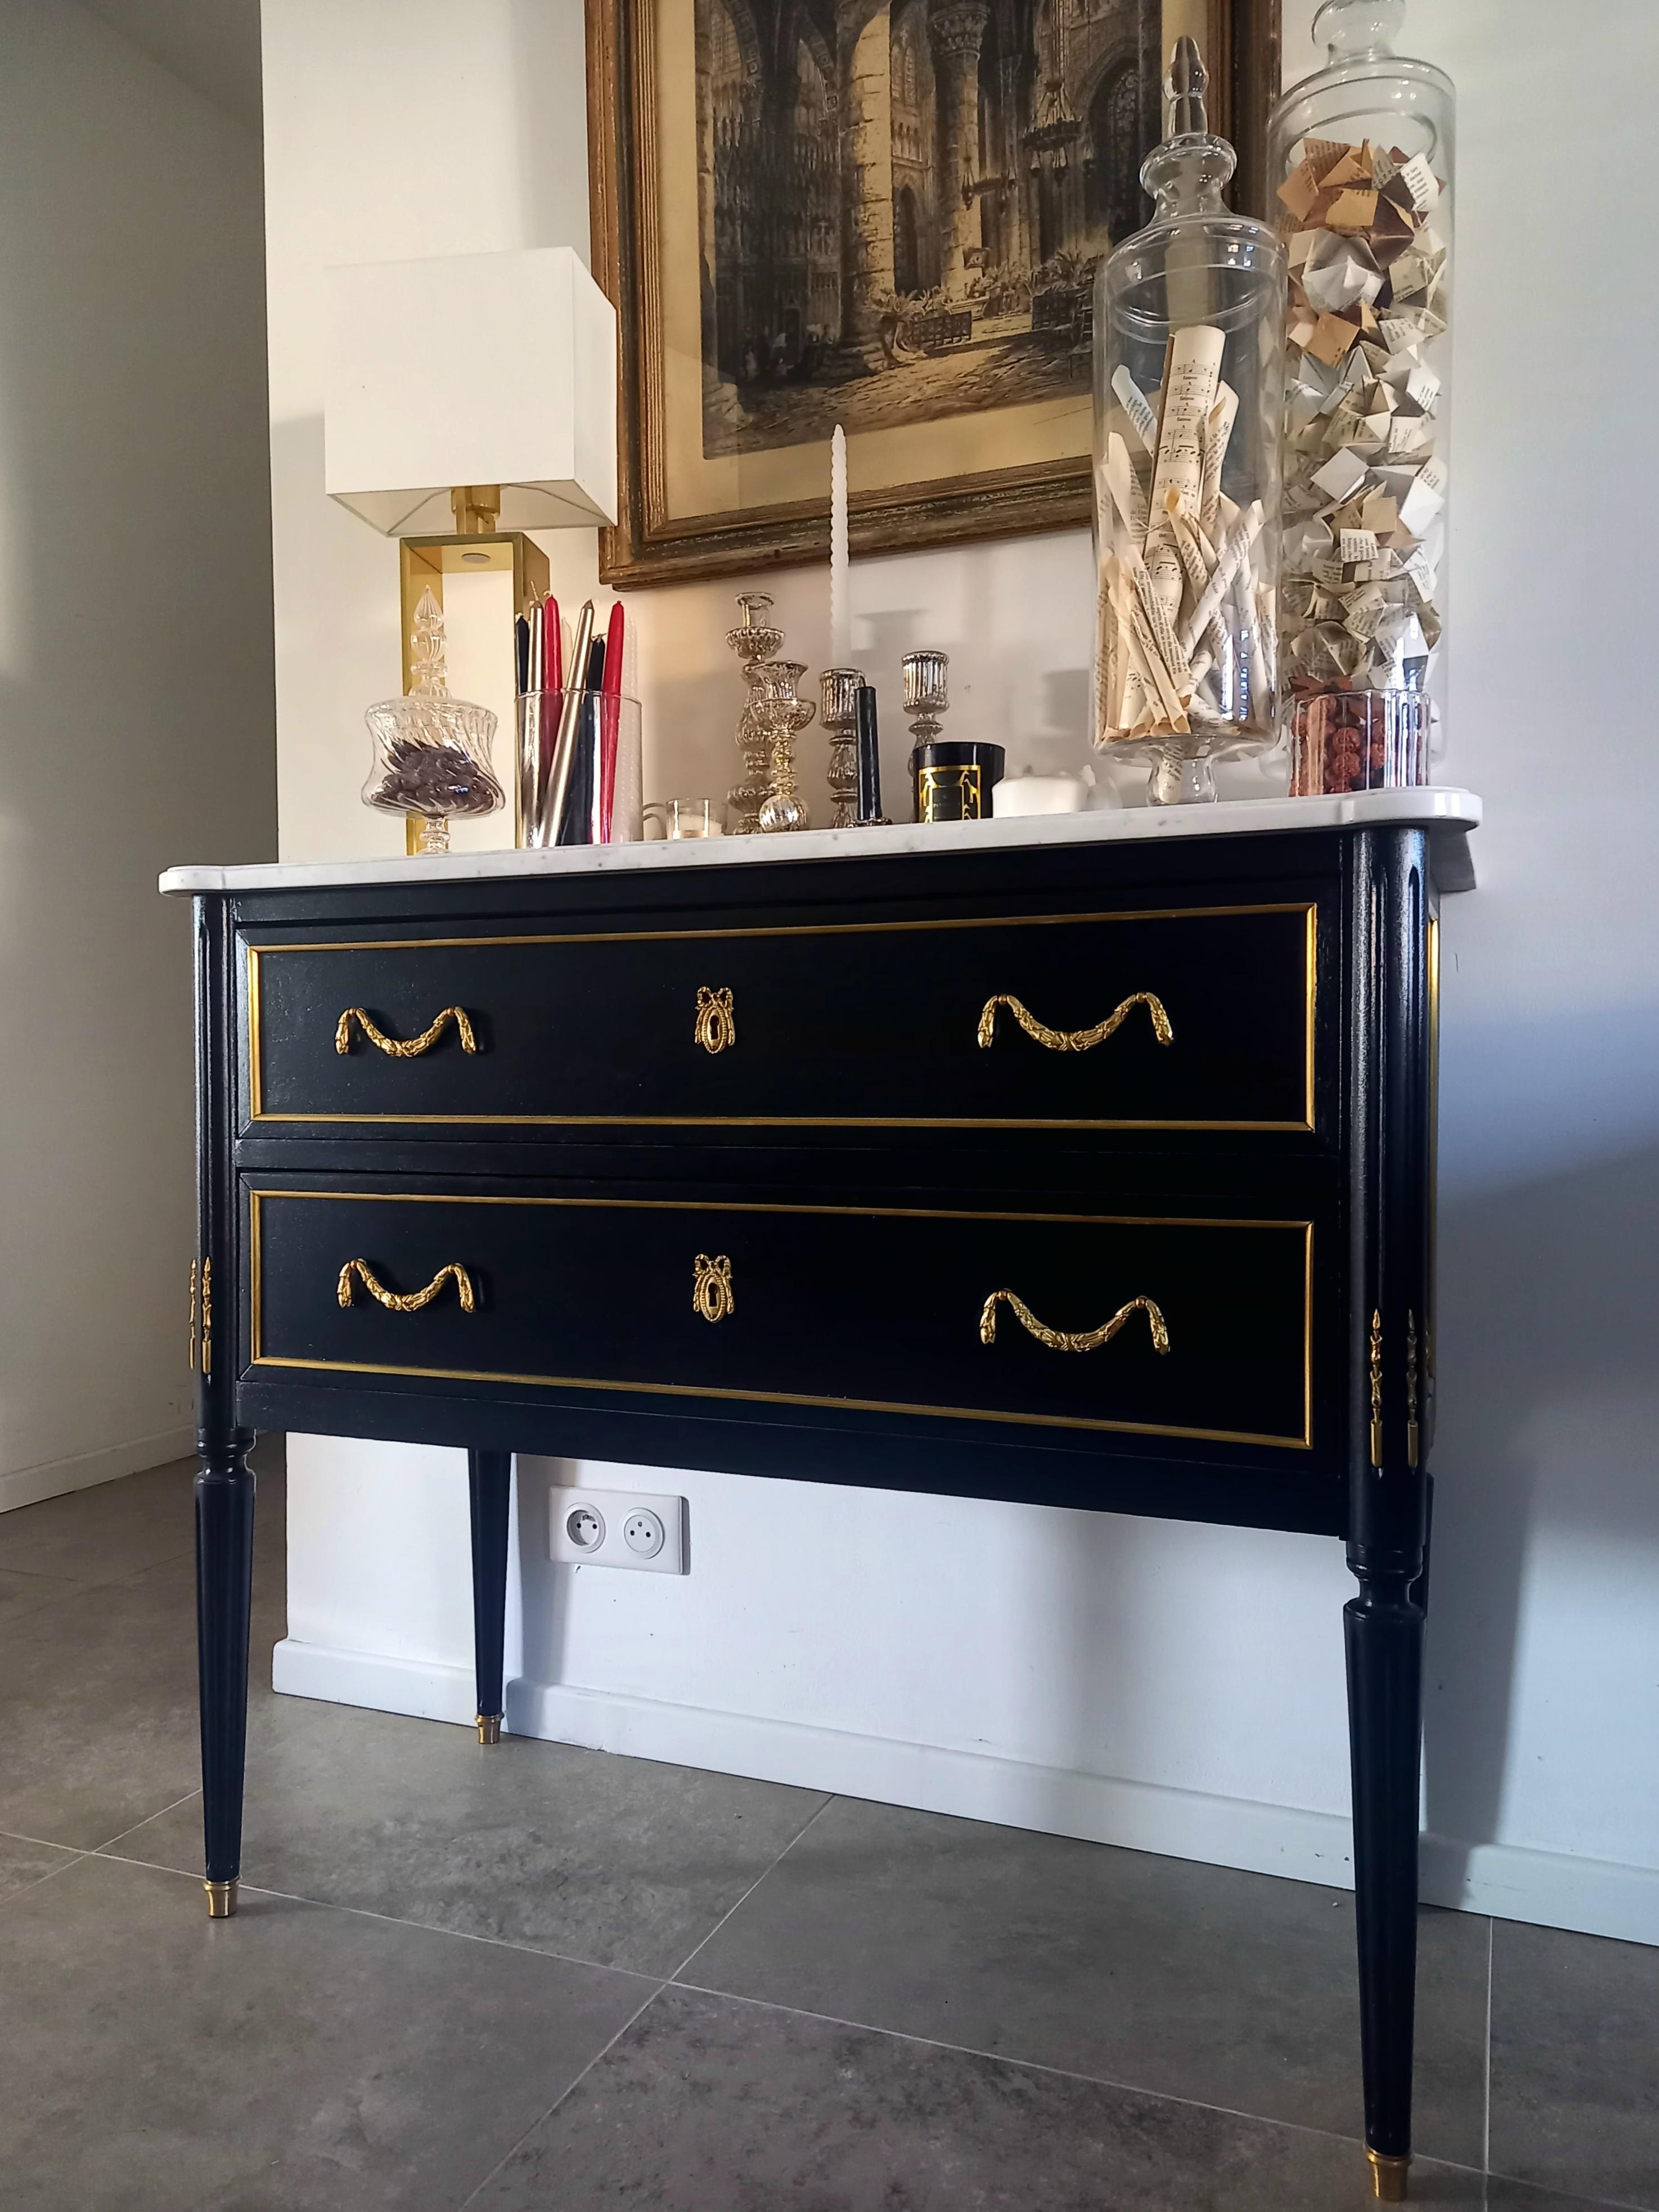 Antique French Louis XVI style chest of drawers topped with a white Carrara marble, fluted legs finished with golden bronze clogs.
The handles are in the shape of bronze ribbons, and pretty details decorate the uprights of the furniture, bringing a